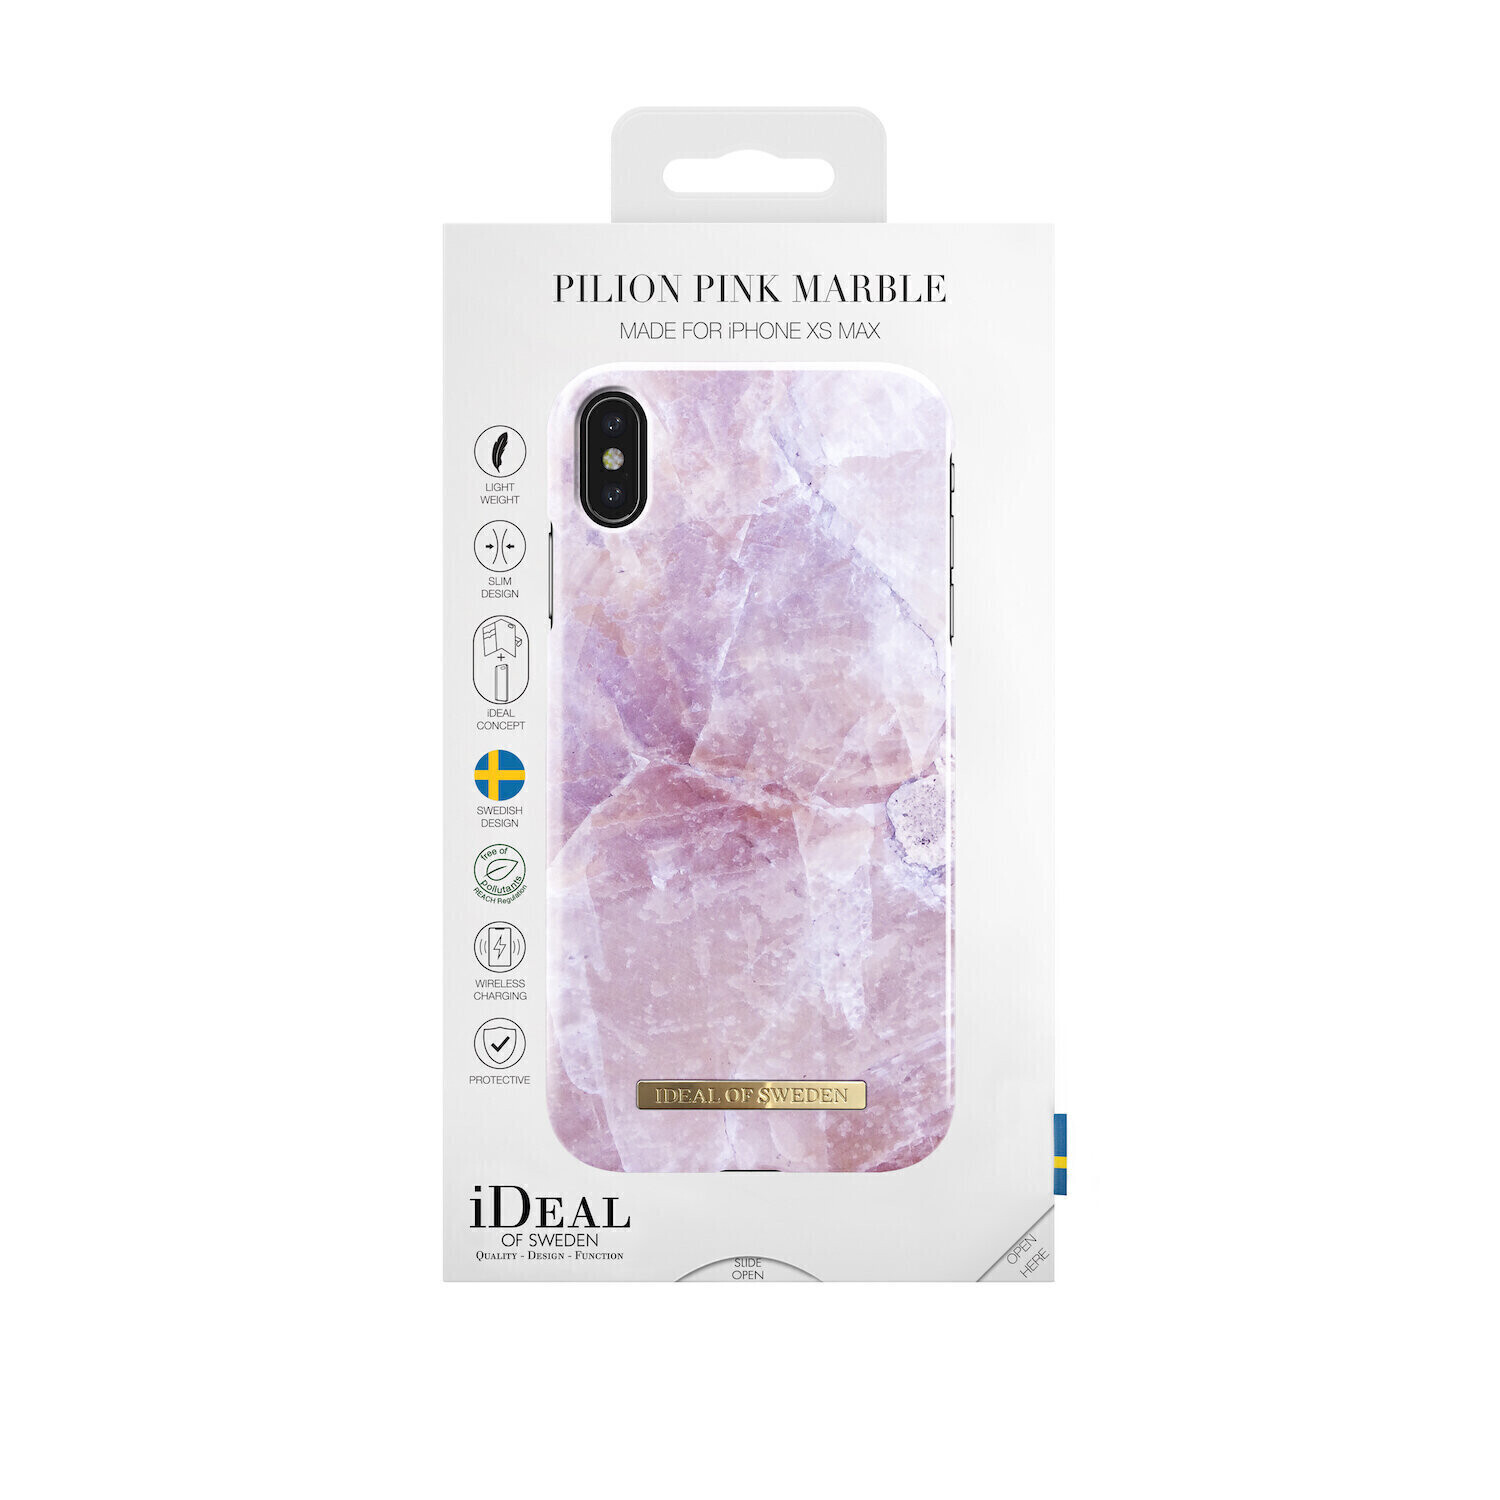 iDeal Of Sweden iPhone Xs Max Fashion Case S/S 2017, Pilion Pink Marble